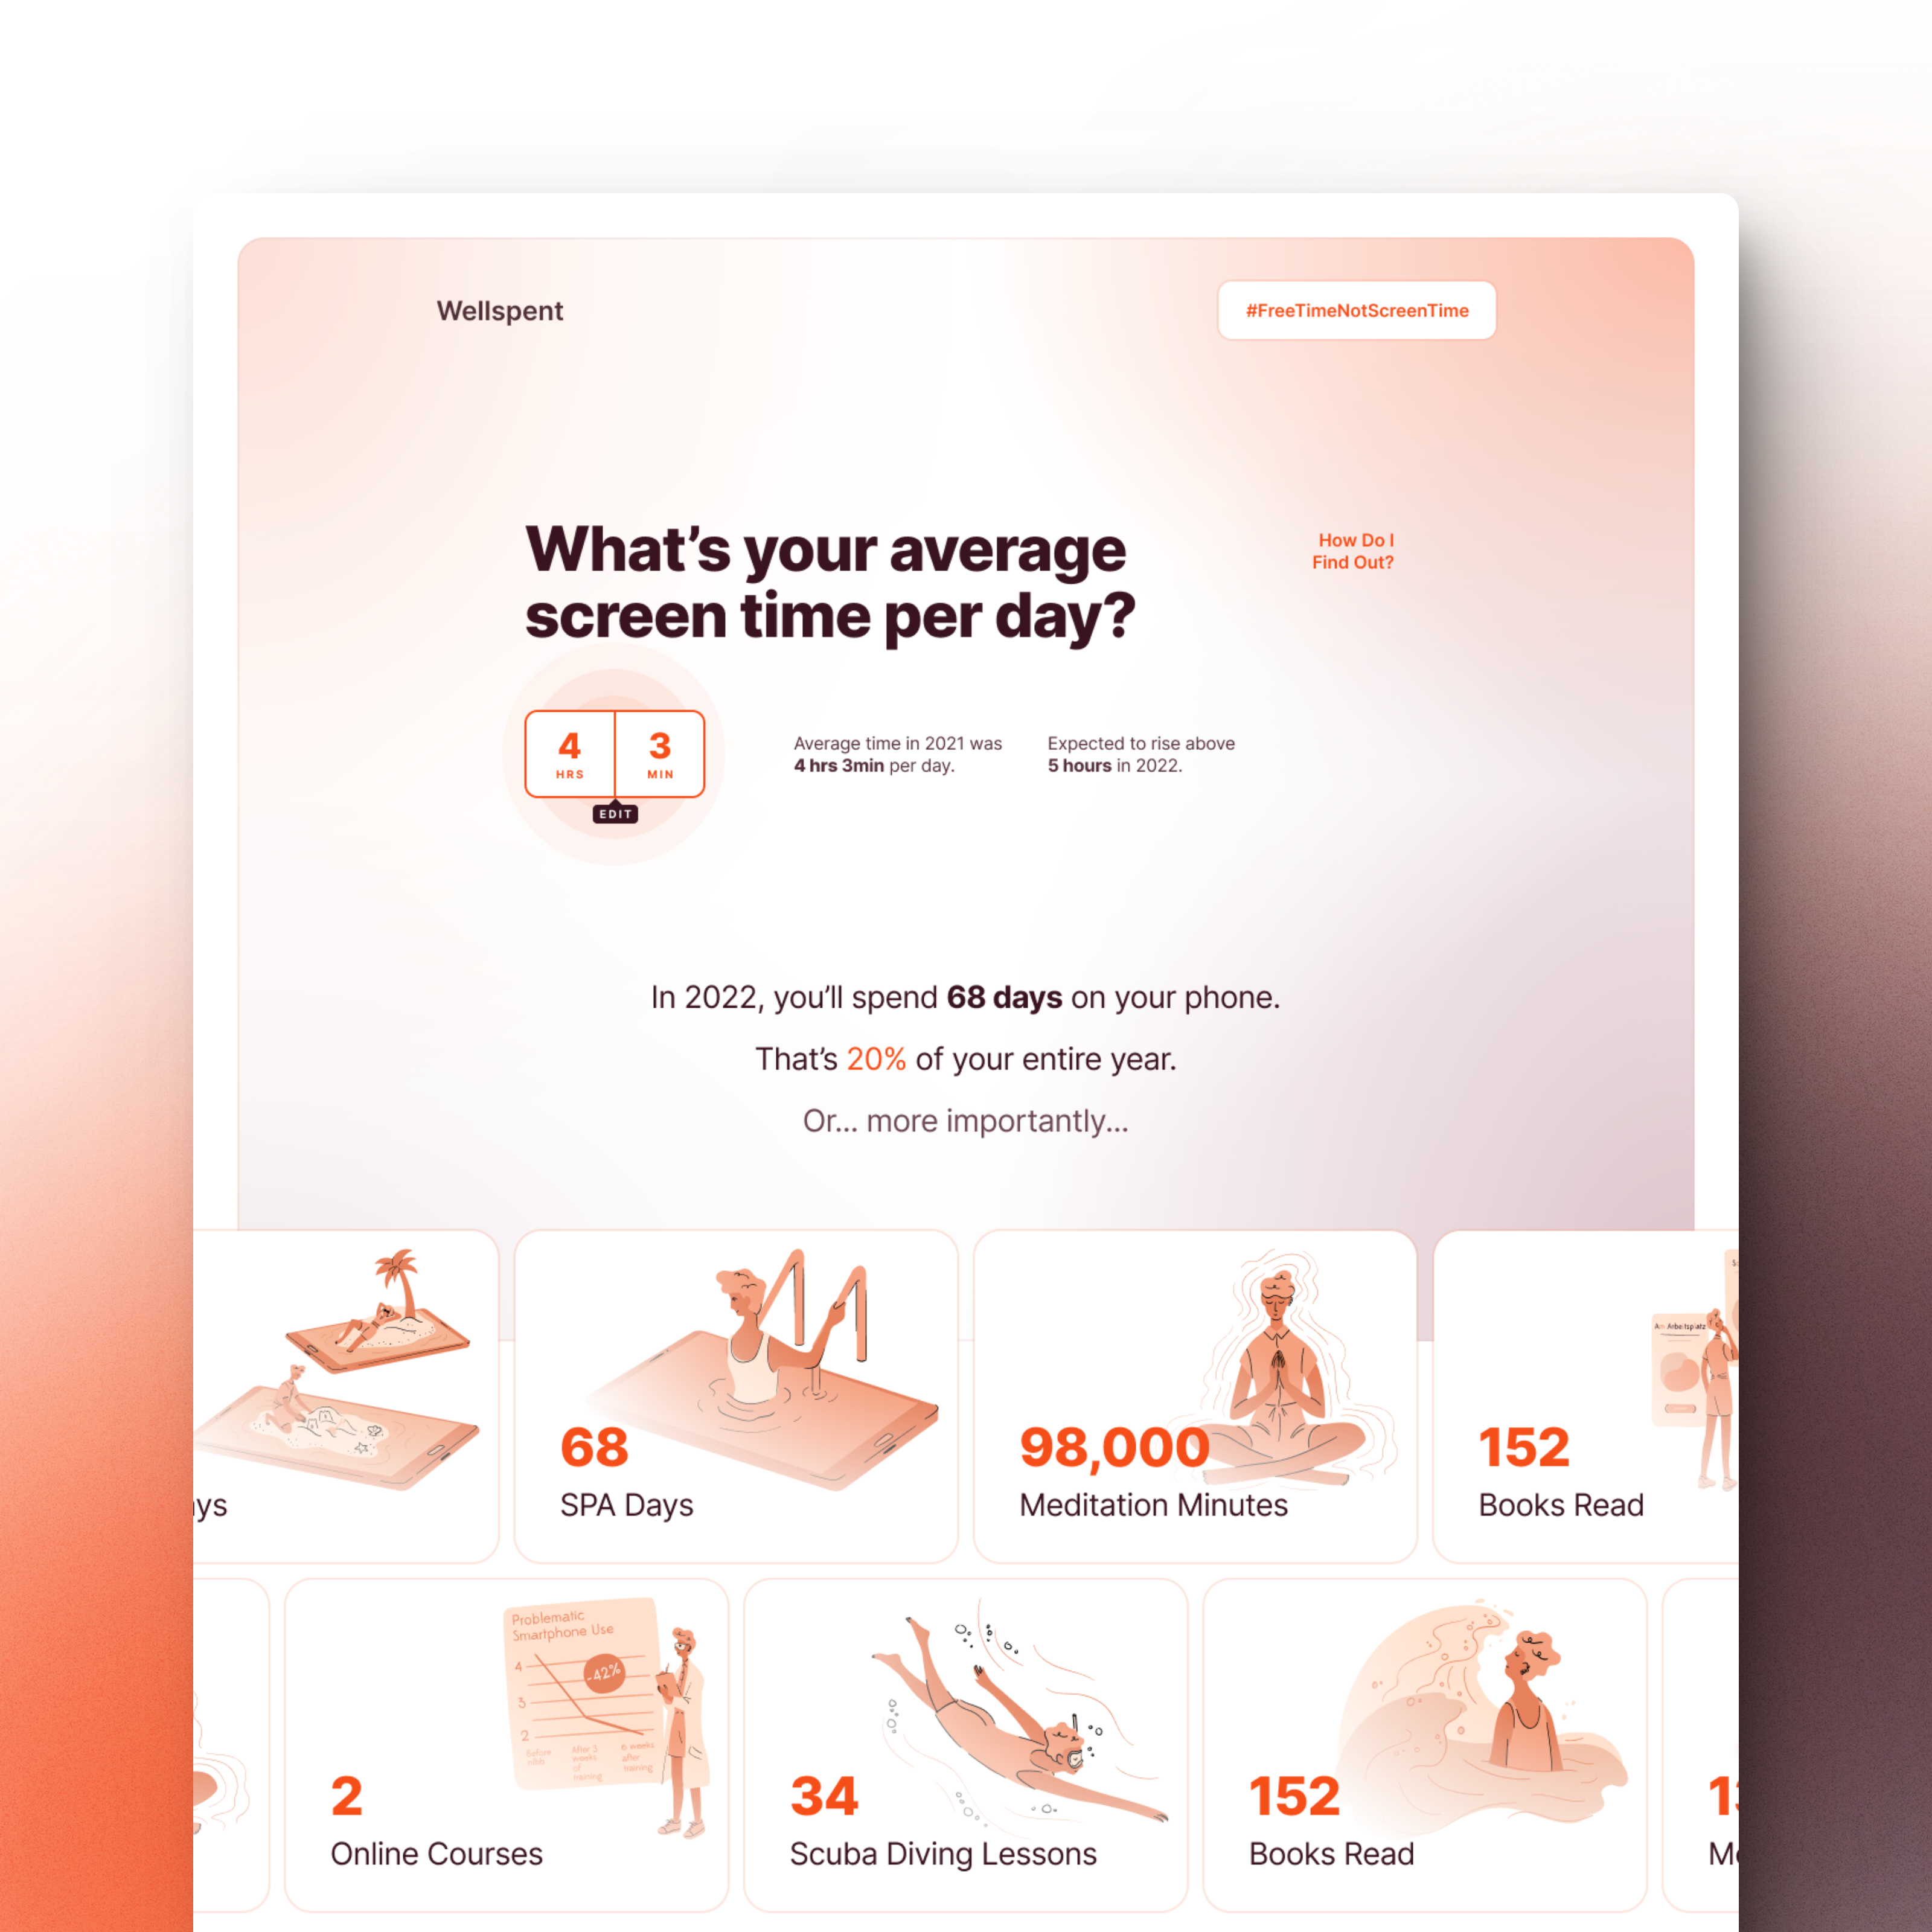 website screenshot: asking what the users average screen time per day is. The value is 4 hours and 3 minutes.